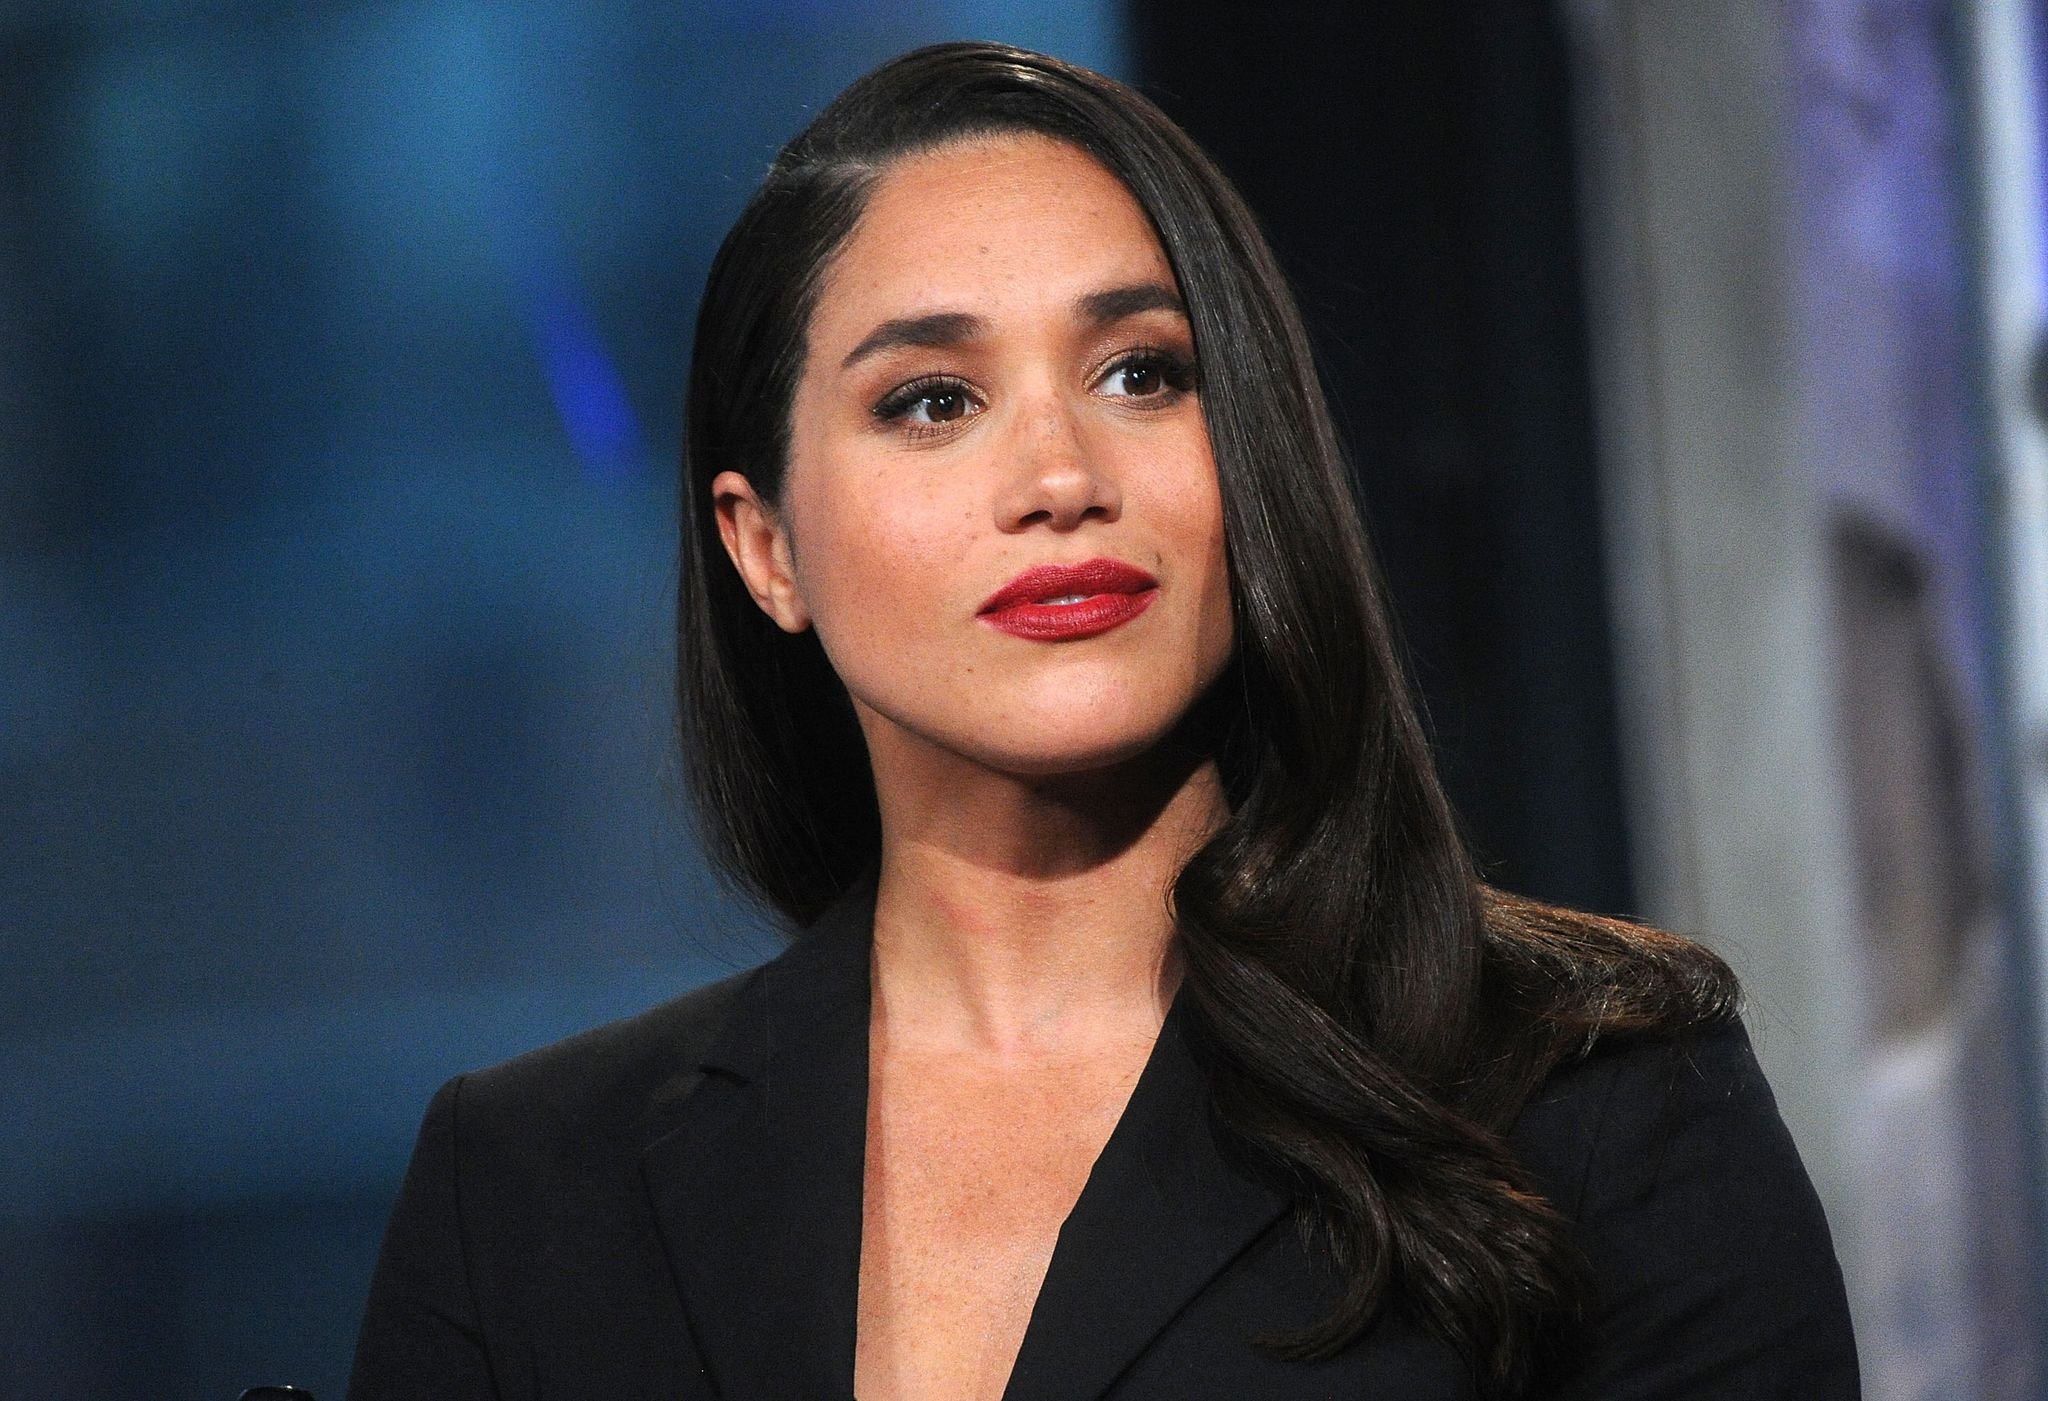 Meghan Markle at AOL Build Presents "Suits" at AOL Studios In New York on March 17, 2016 in New York City. | Photo: Getty Images